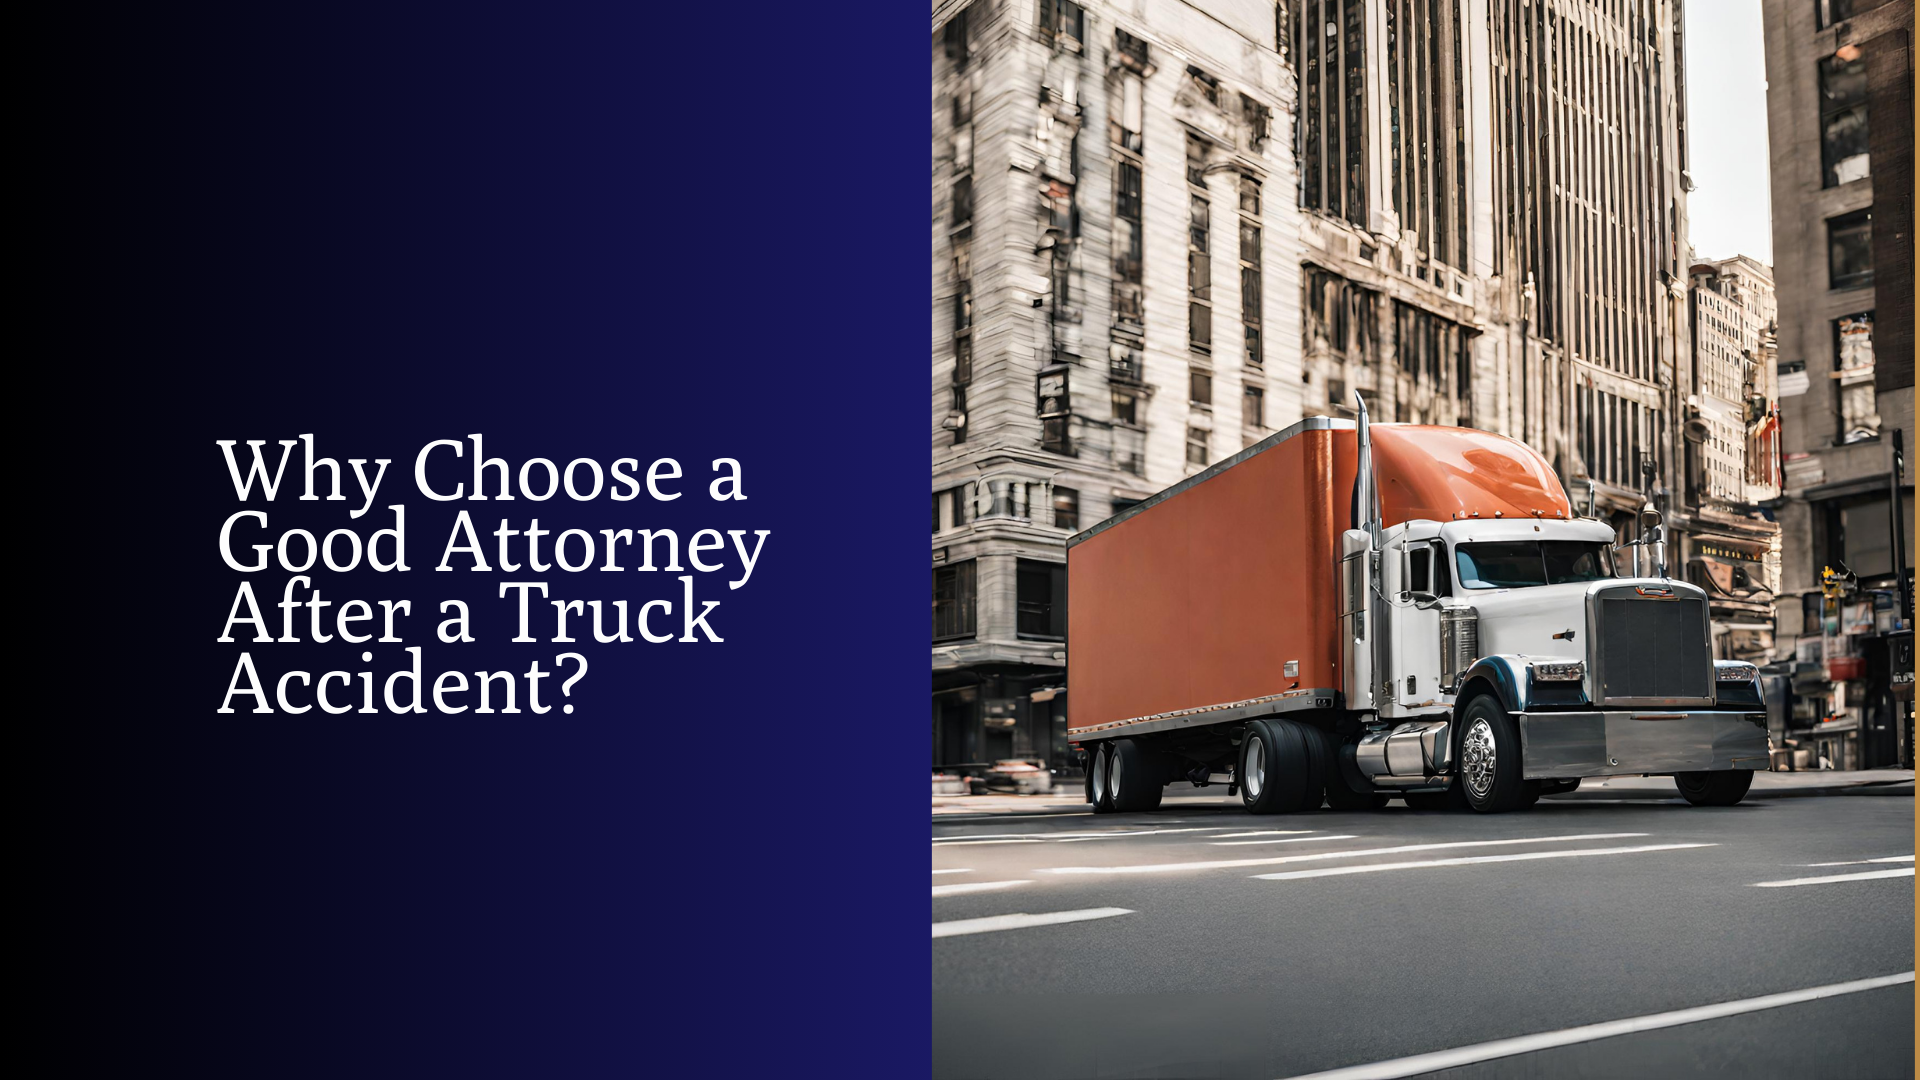 Attorney-Accident-Truck-Why-choose-a-good-Attorney